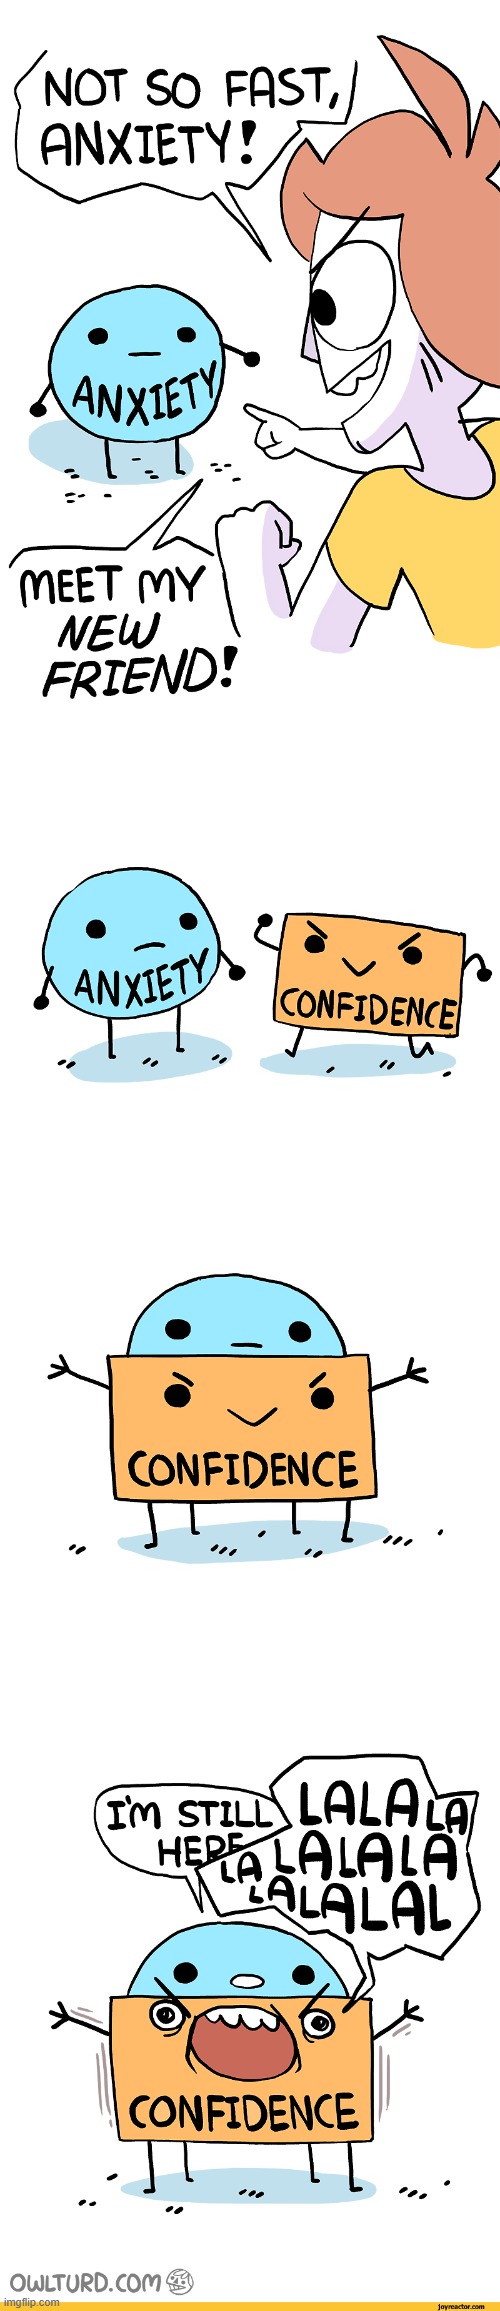 image tagged in anxiety,confidence | made w/ Imgflip meme maker